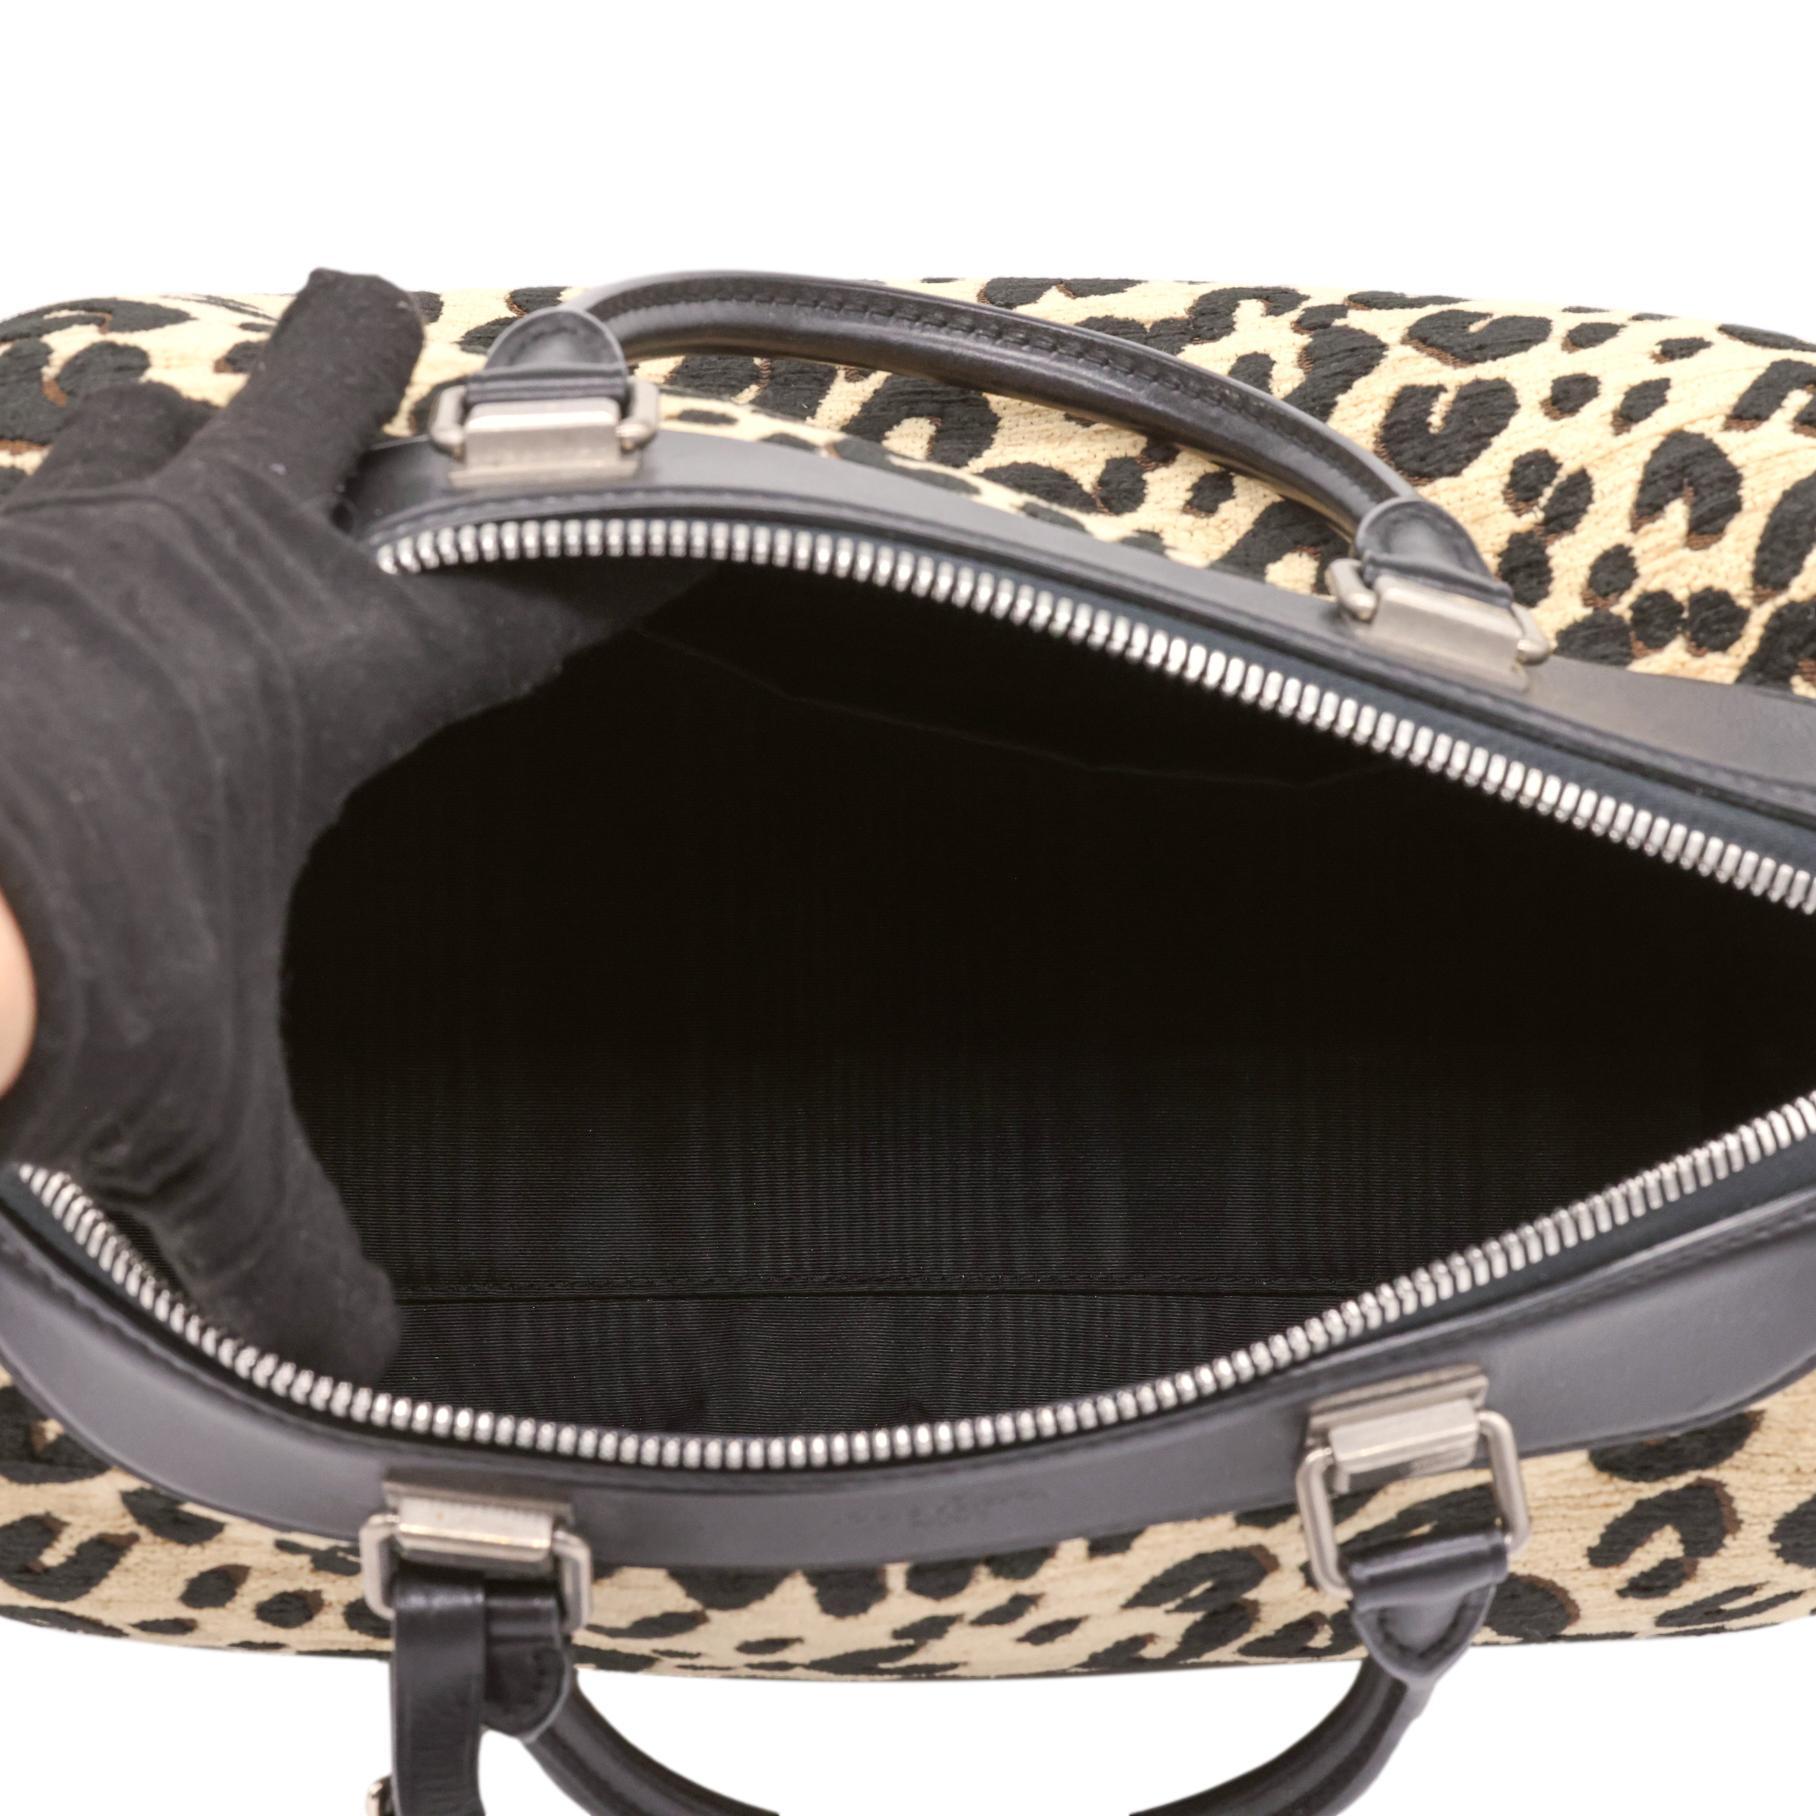 Limited Edition Louis Vuitton x Stephen Sprouse Leopard Speedy Bag, 2012. 6